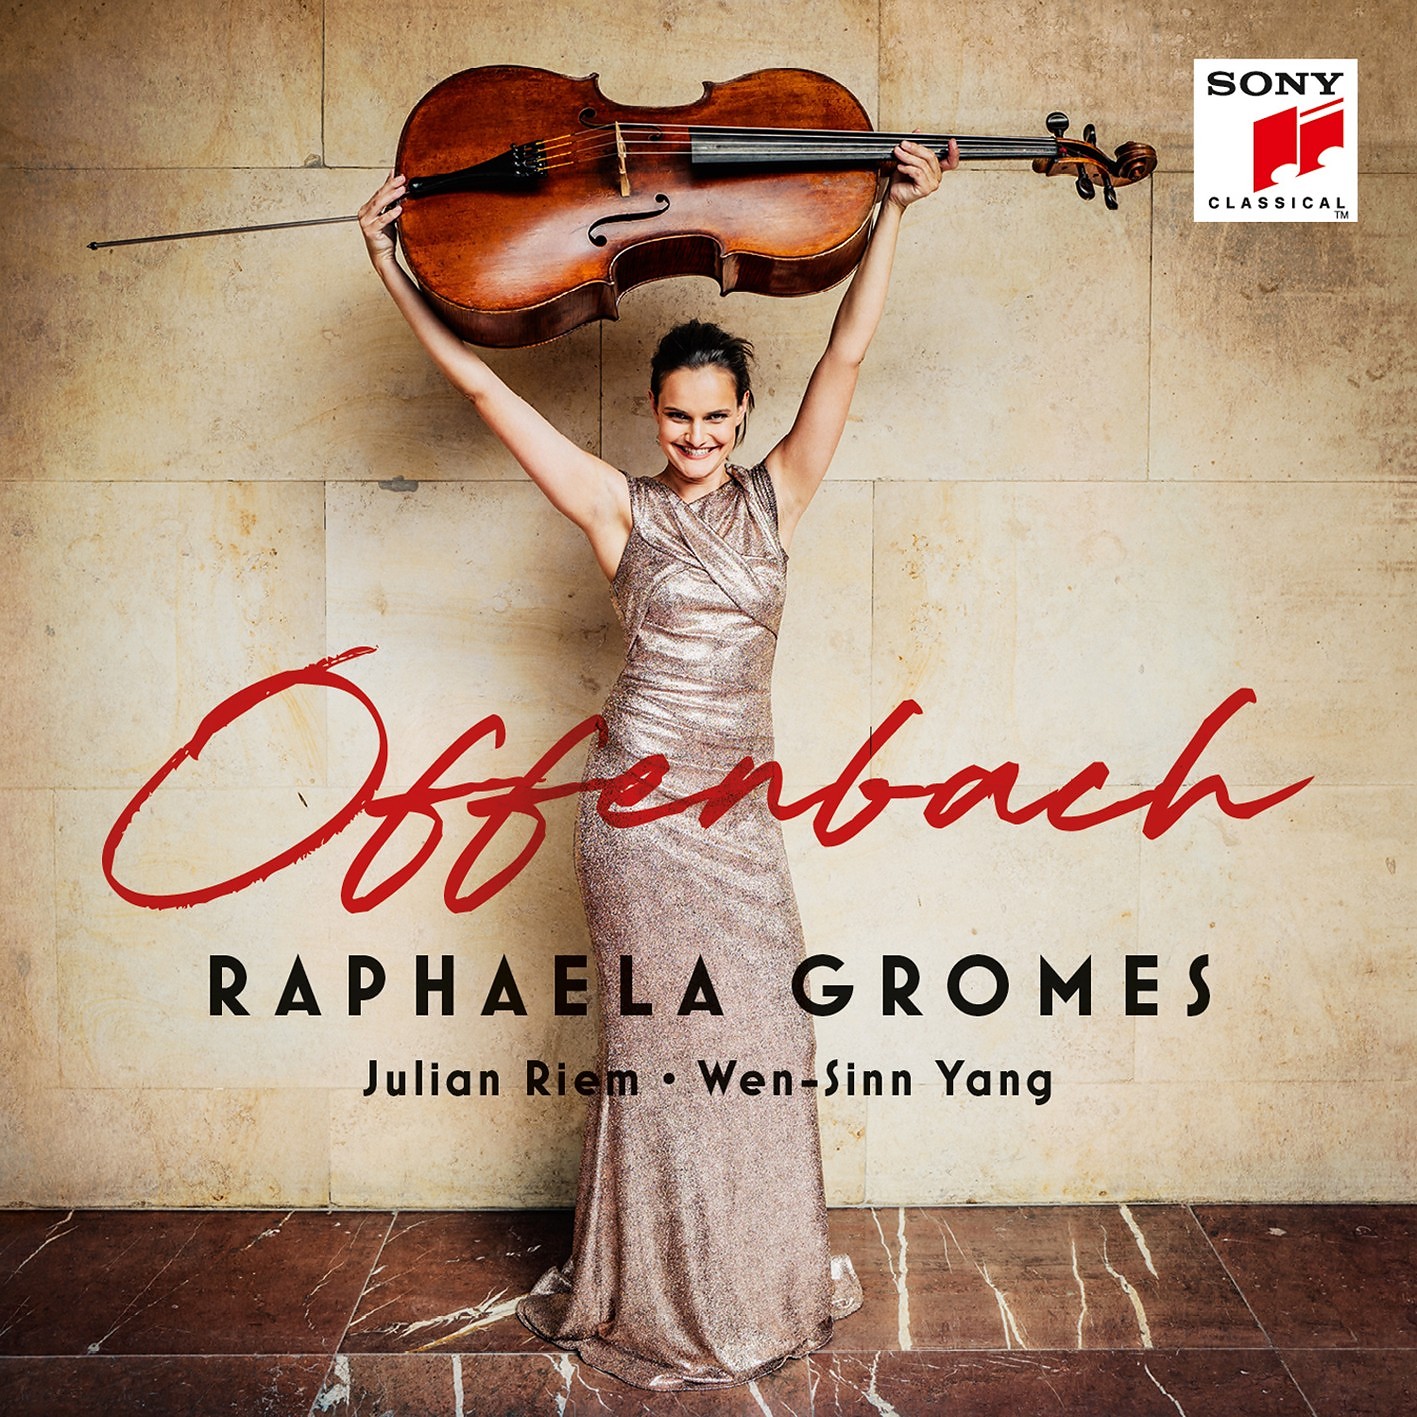 Magical Journey: Jacques Offenbach - Music for Cello (Raphaela Gromes)